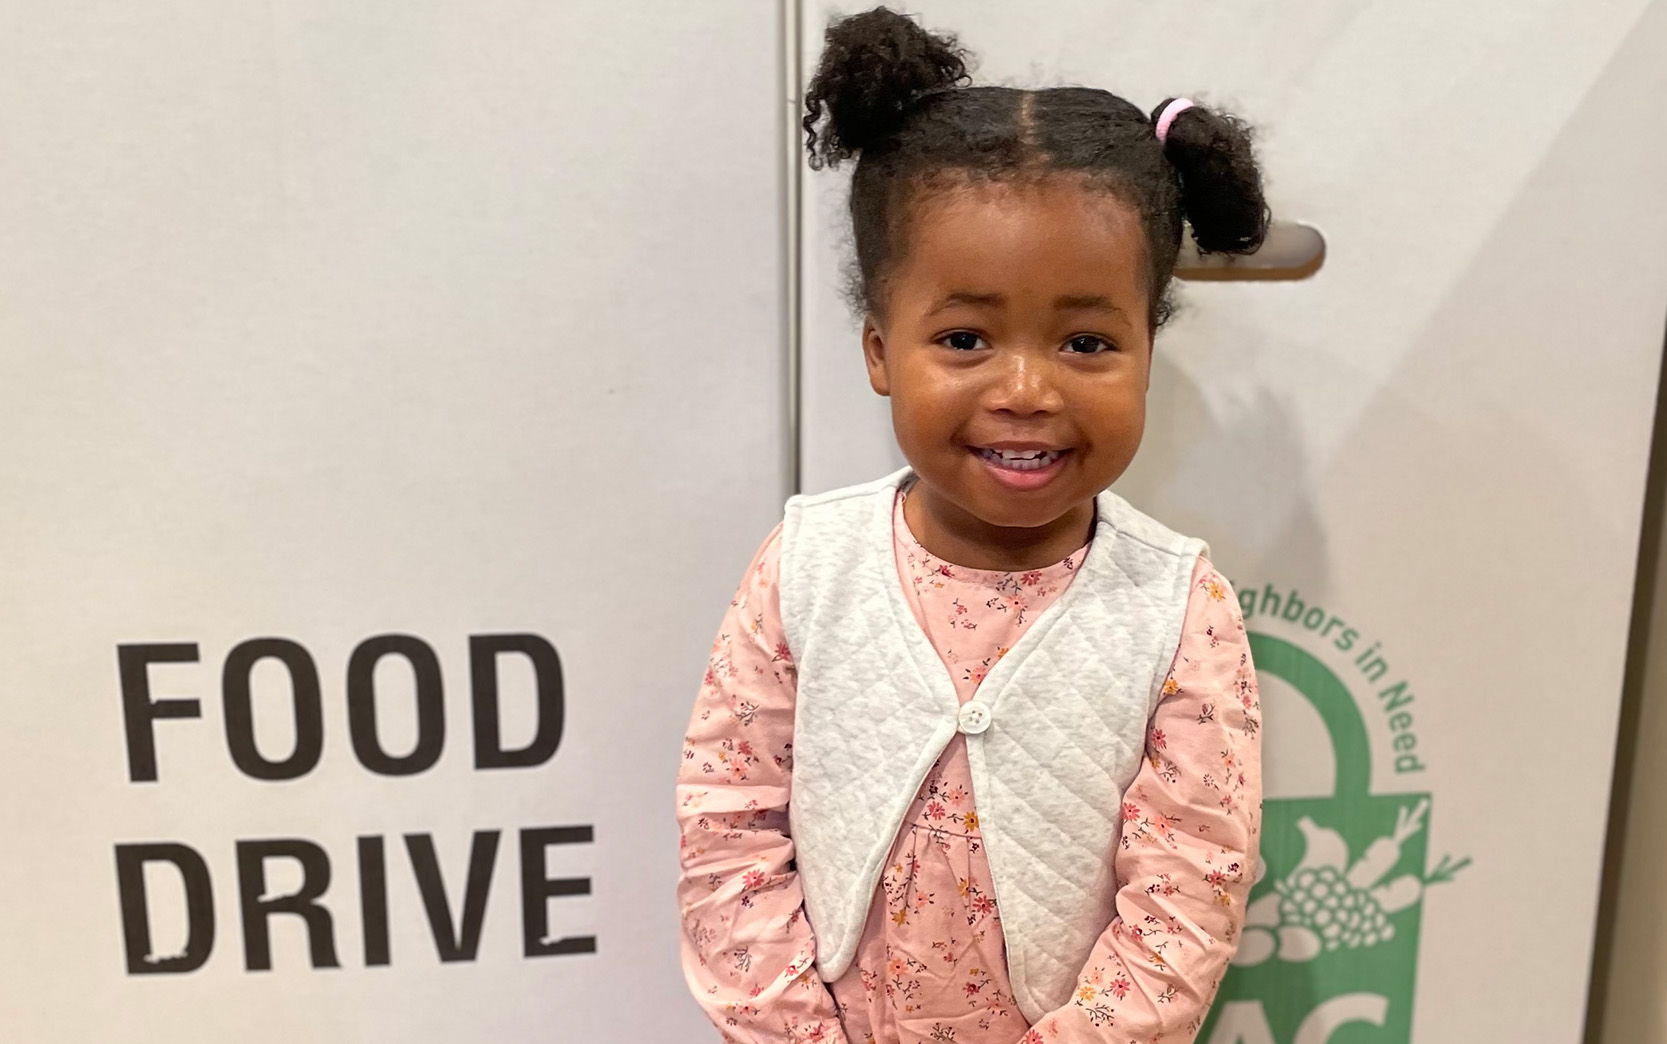 A young student at Primrose School of Arlington (Arlington, VA) participates in the Caring and Giving Food drive by donating an assortment of nonperishable food items.